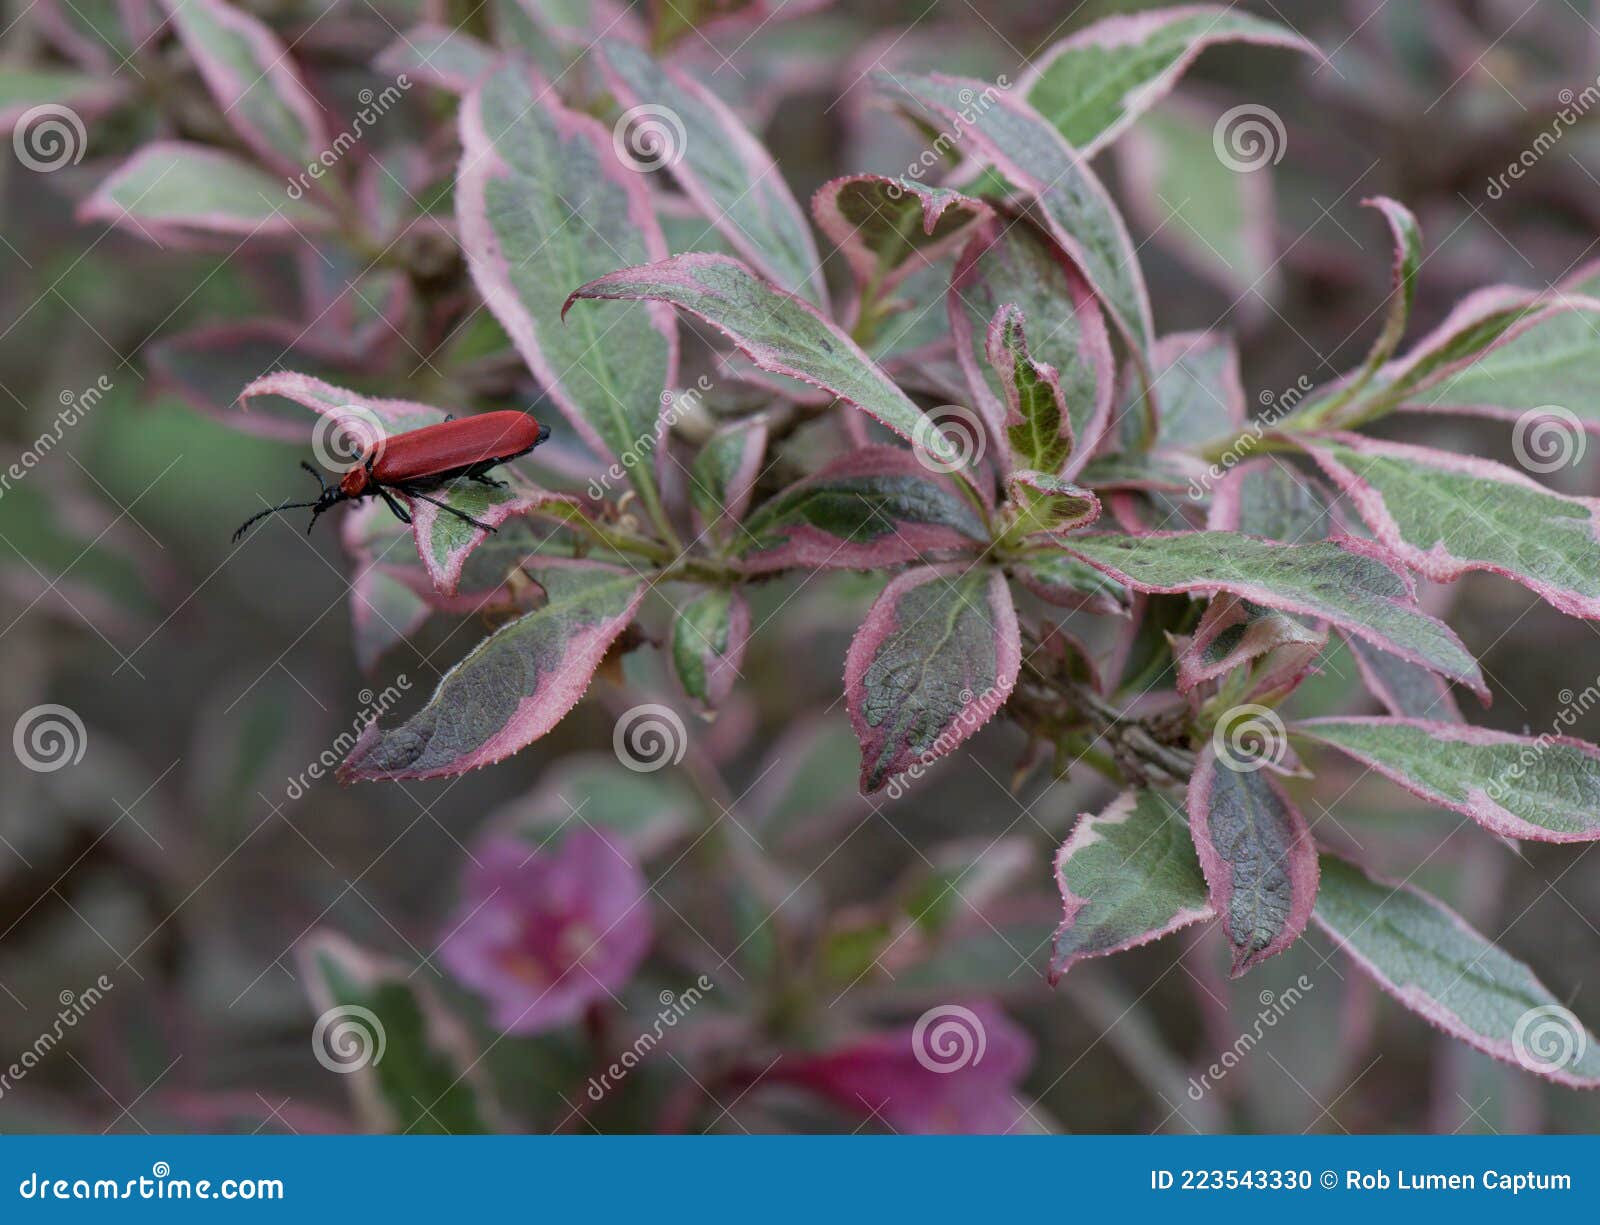 old-fashioned weigela florida monet, rosey-pink, tubular flowers with red beetle